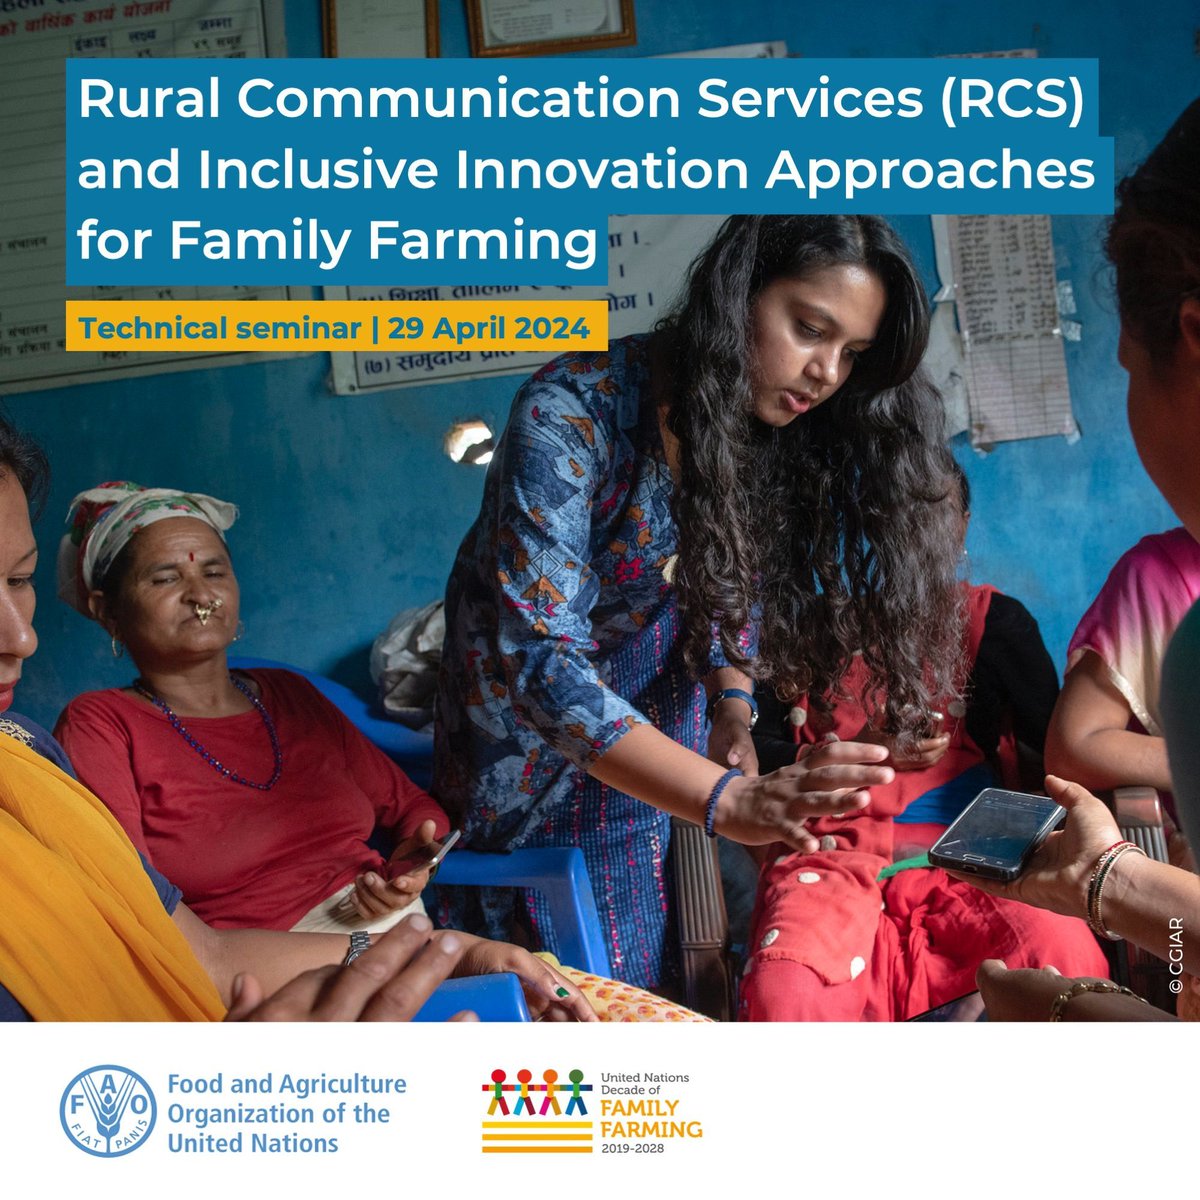 Join @FAO’s technical seminar on Rural Communication Services & inclusive Innovation for Family Farming & let's empower family farmers together! 🌱 🗓️ Tomorrow 29/04 Register buff.ly/4aAOwLv Watch 🕘 09:00: buff.ly/4d5VLga 🕑 14:00: buff.ly/4d59KTn